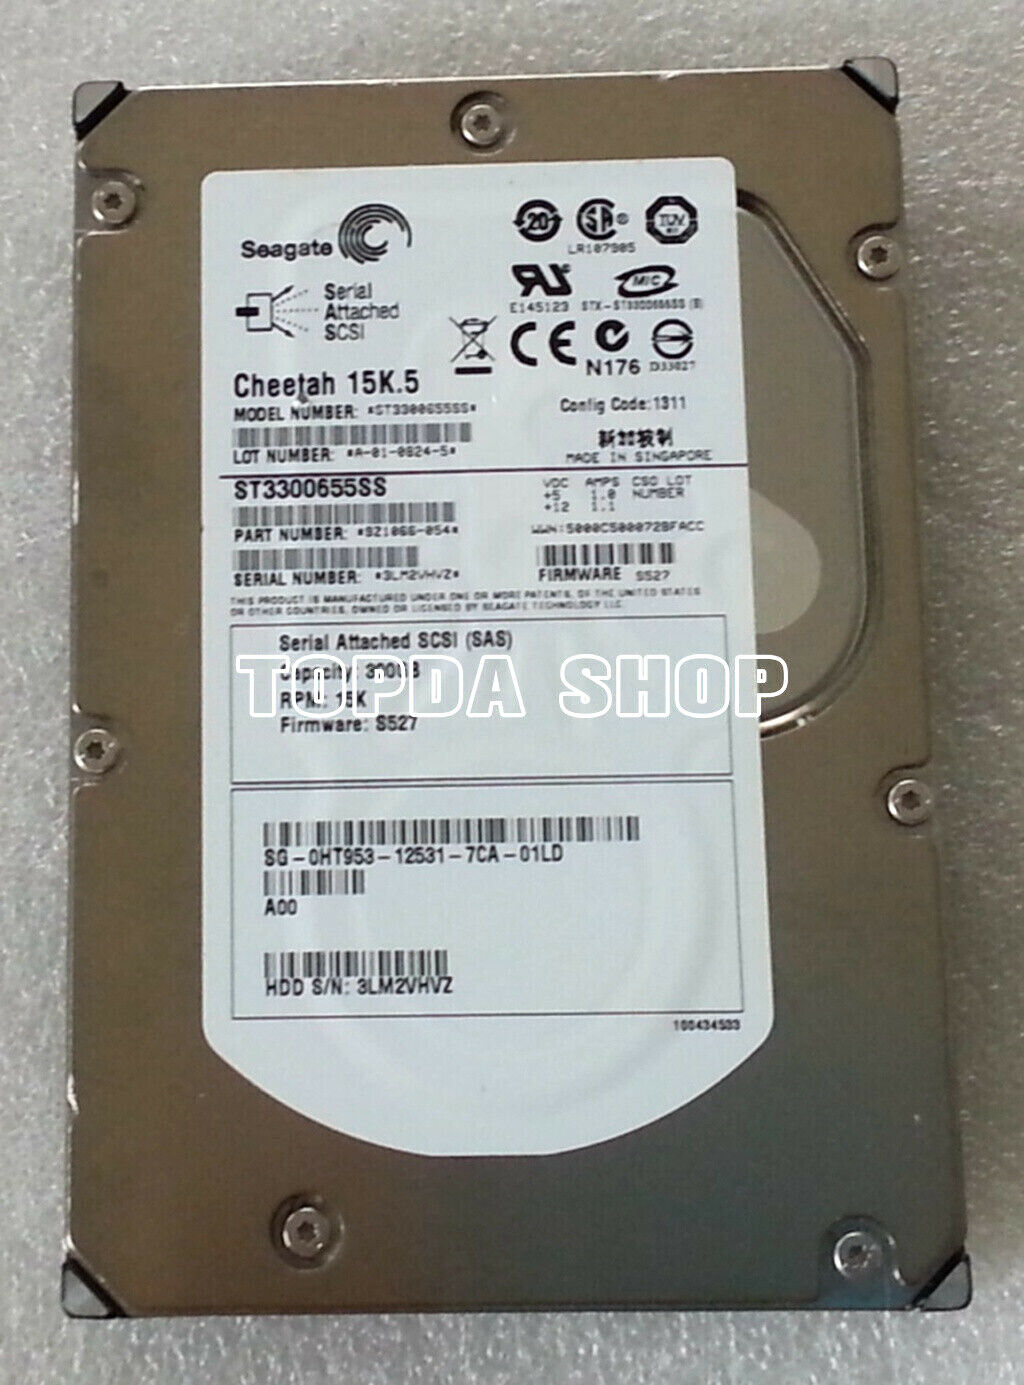 1PC ST3300655SS 300G 15K.5 SAS hard drive CA06306-H414 fit for Seagate